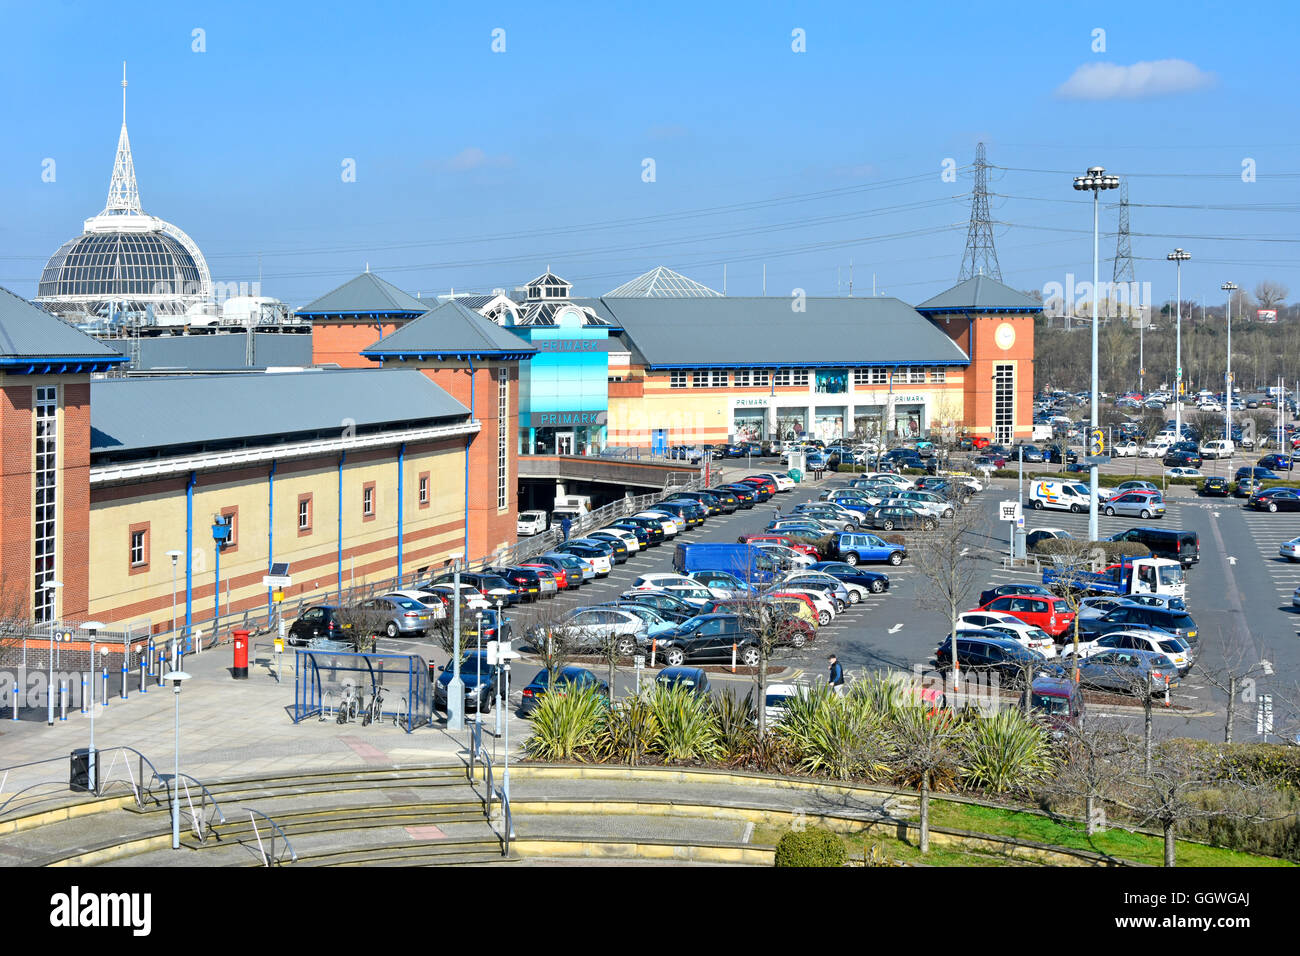 Aerial view exterior modern buildings forming part of Lakeside indoor shopping complex large free car parking areas at West Thurrock Essex England UK Stock Photo